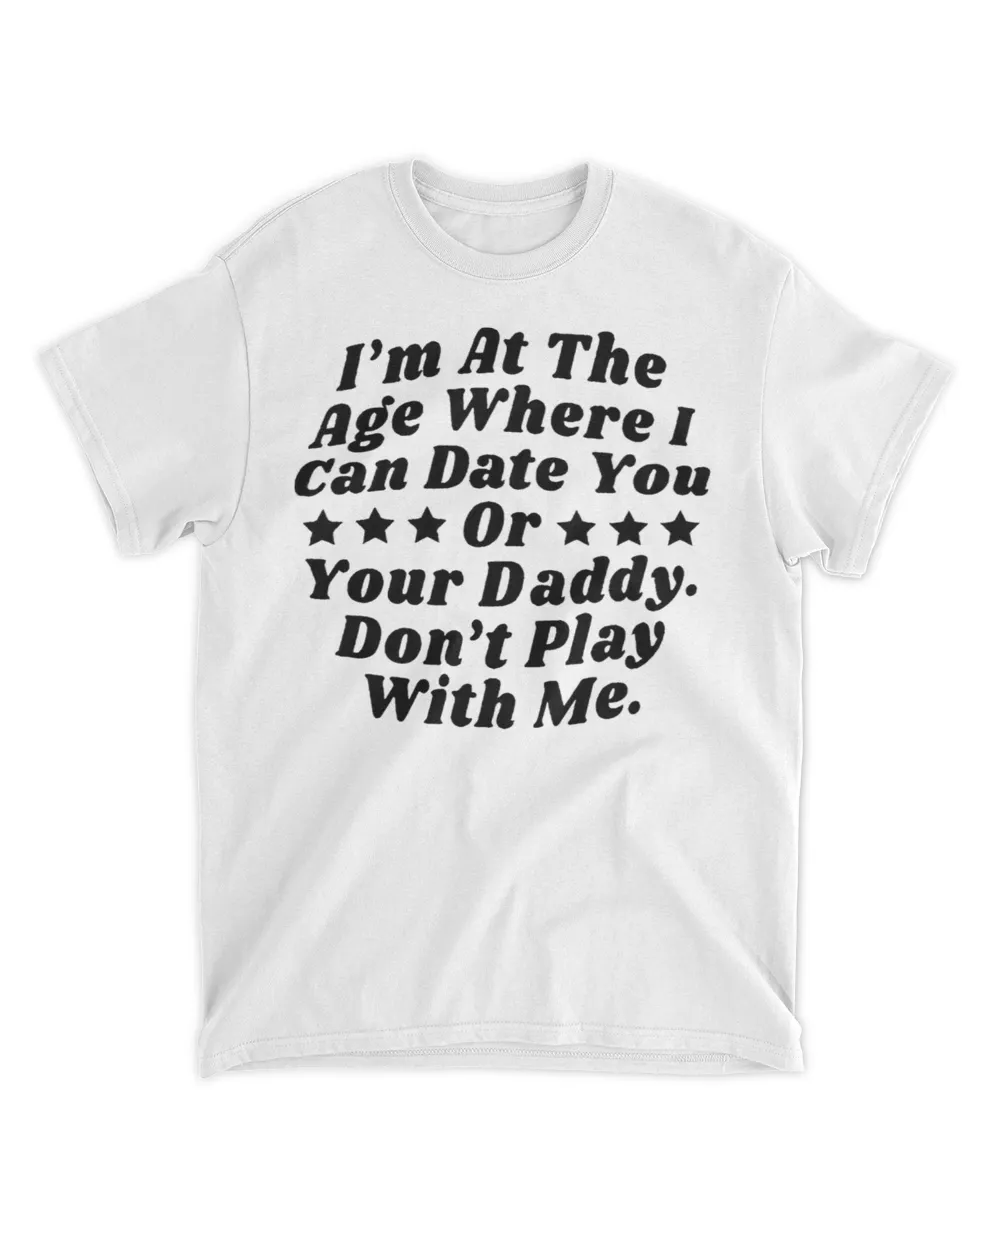  I'm at the age where I can date you or your daddy don't play with me shirt